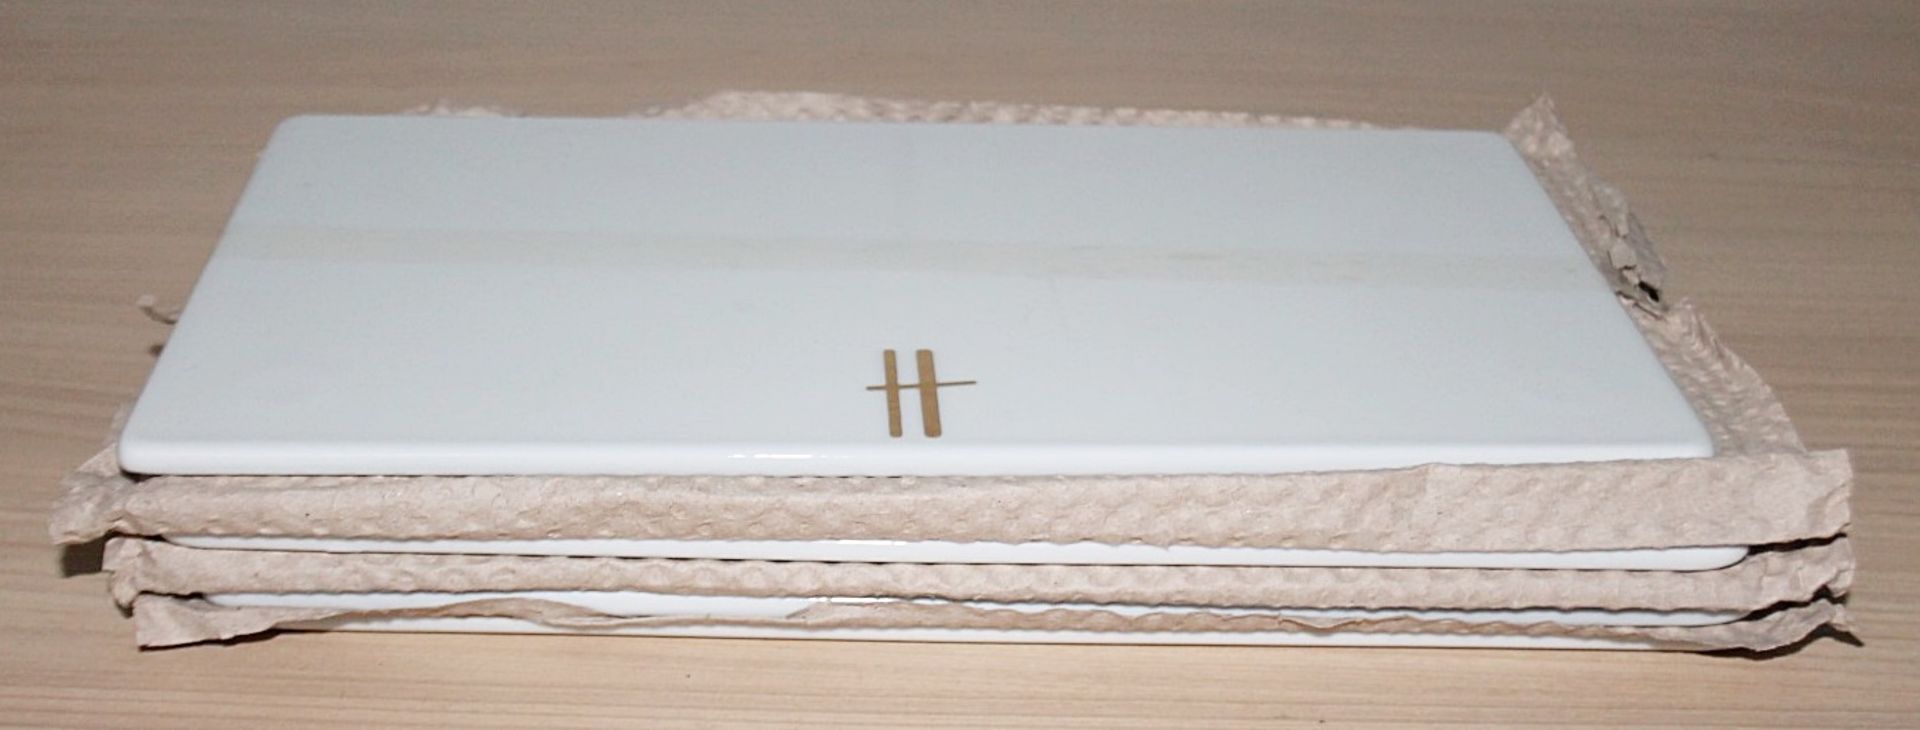 12 x PILLIVUYT Porcelain Rectangular Serving Trays In White Featuring 'Famous Branding' In Gold - - Image 6 of 6